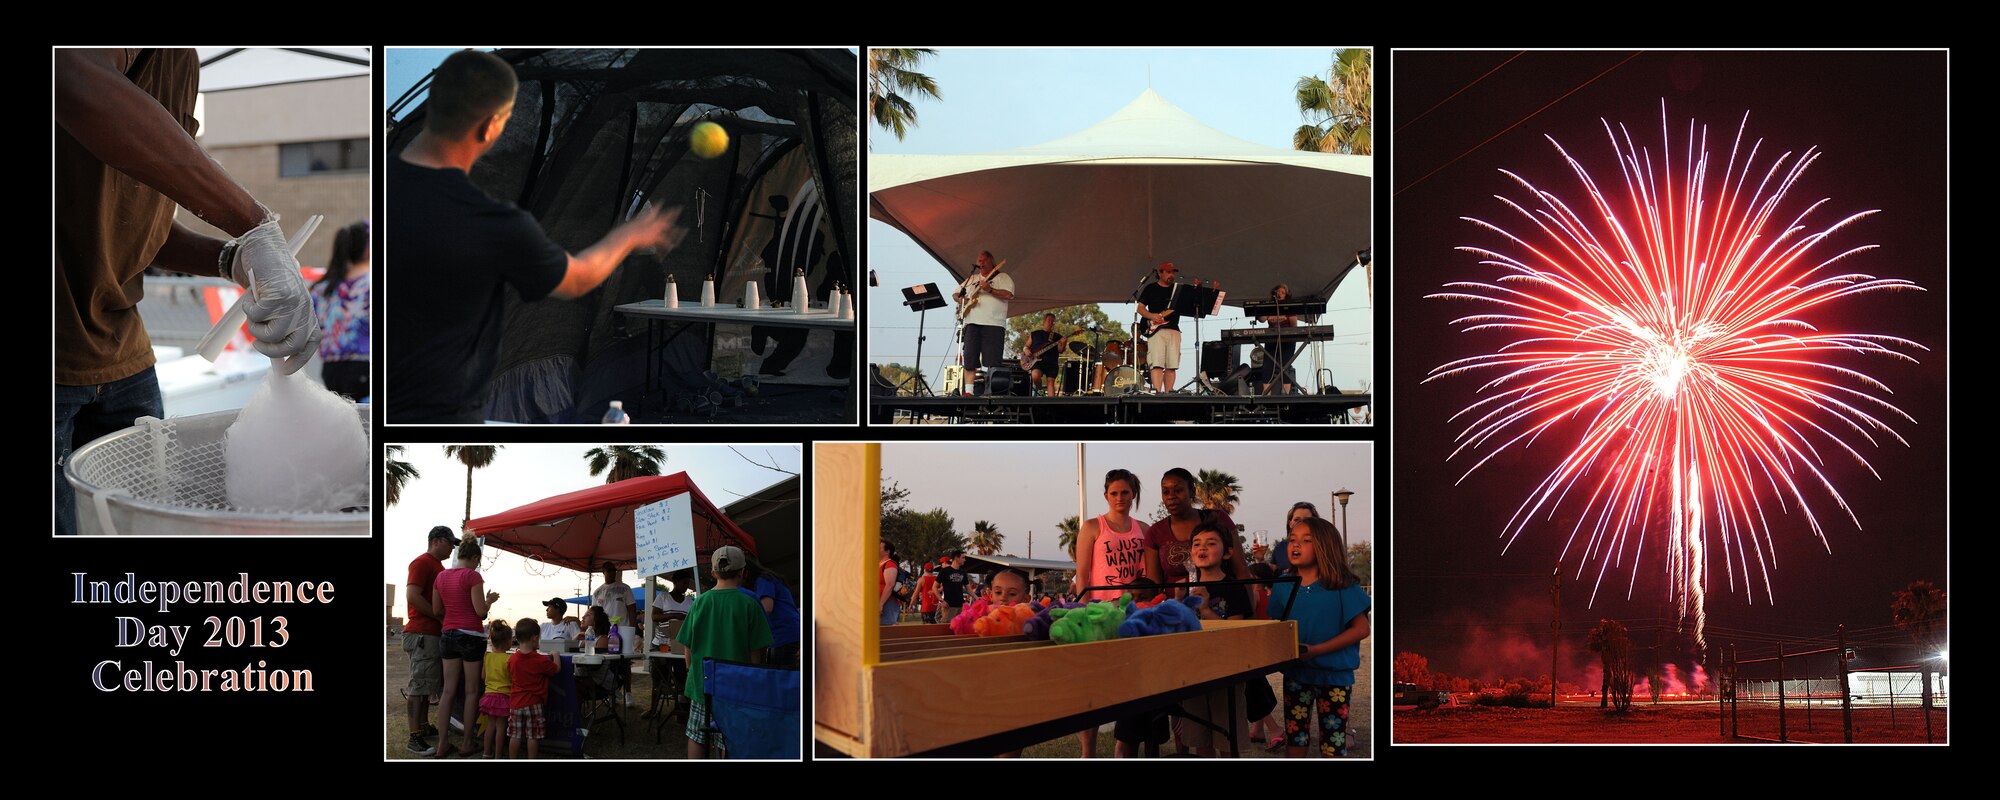 An Independence Day Celebration was held at Davis-Monthan Air Force Base, July 4, 2013. The event included private organization booths, games for families and a performance by the Desert Cadillac Band. A 25-minute firework display ended the celebration.